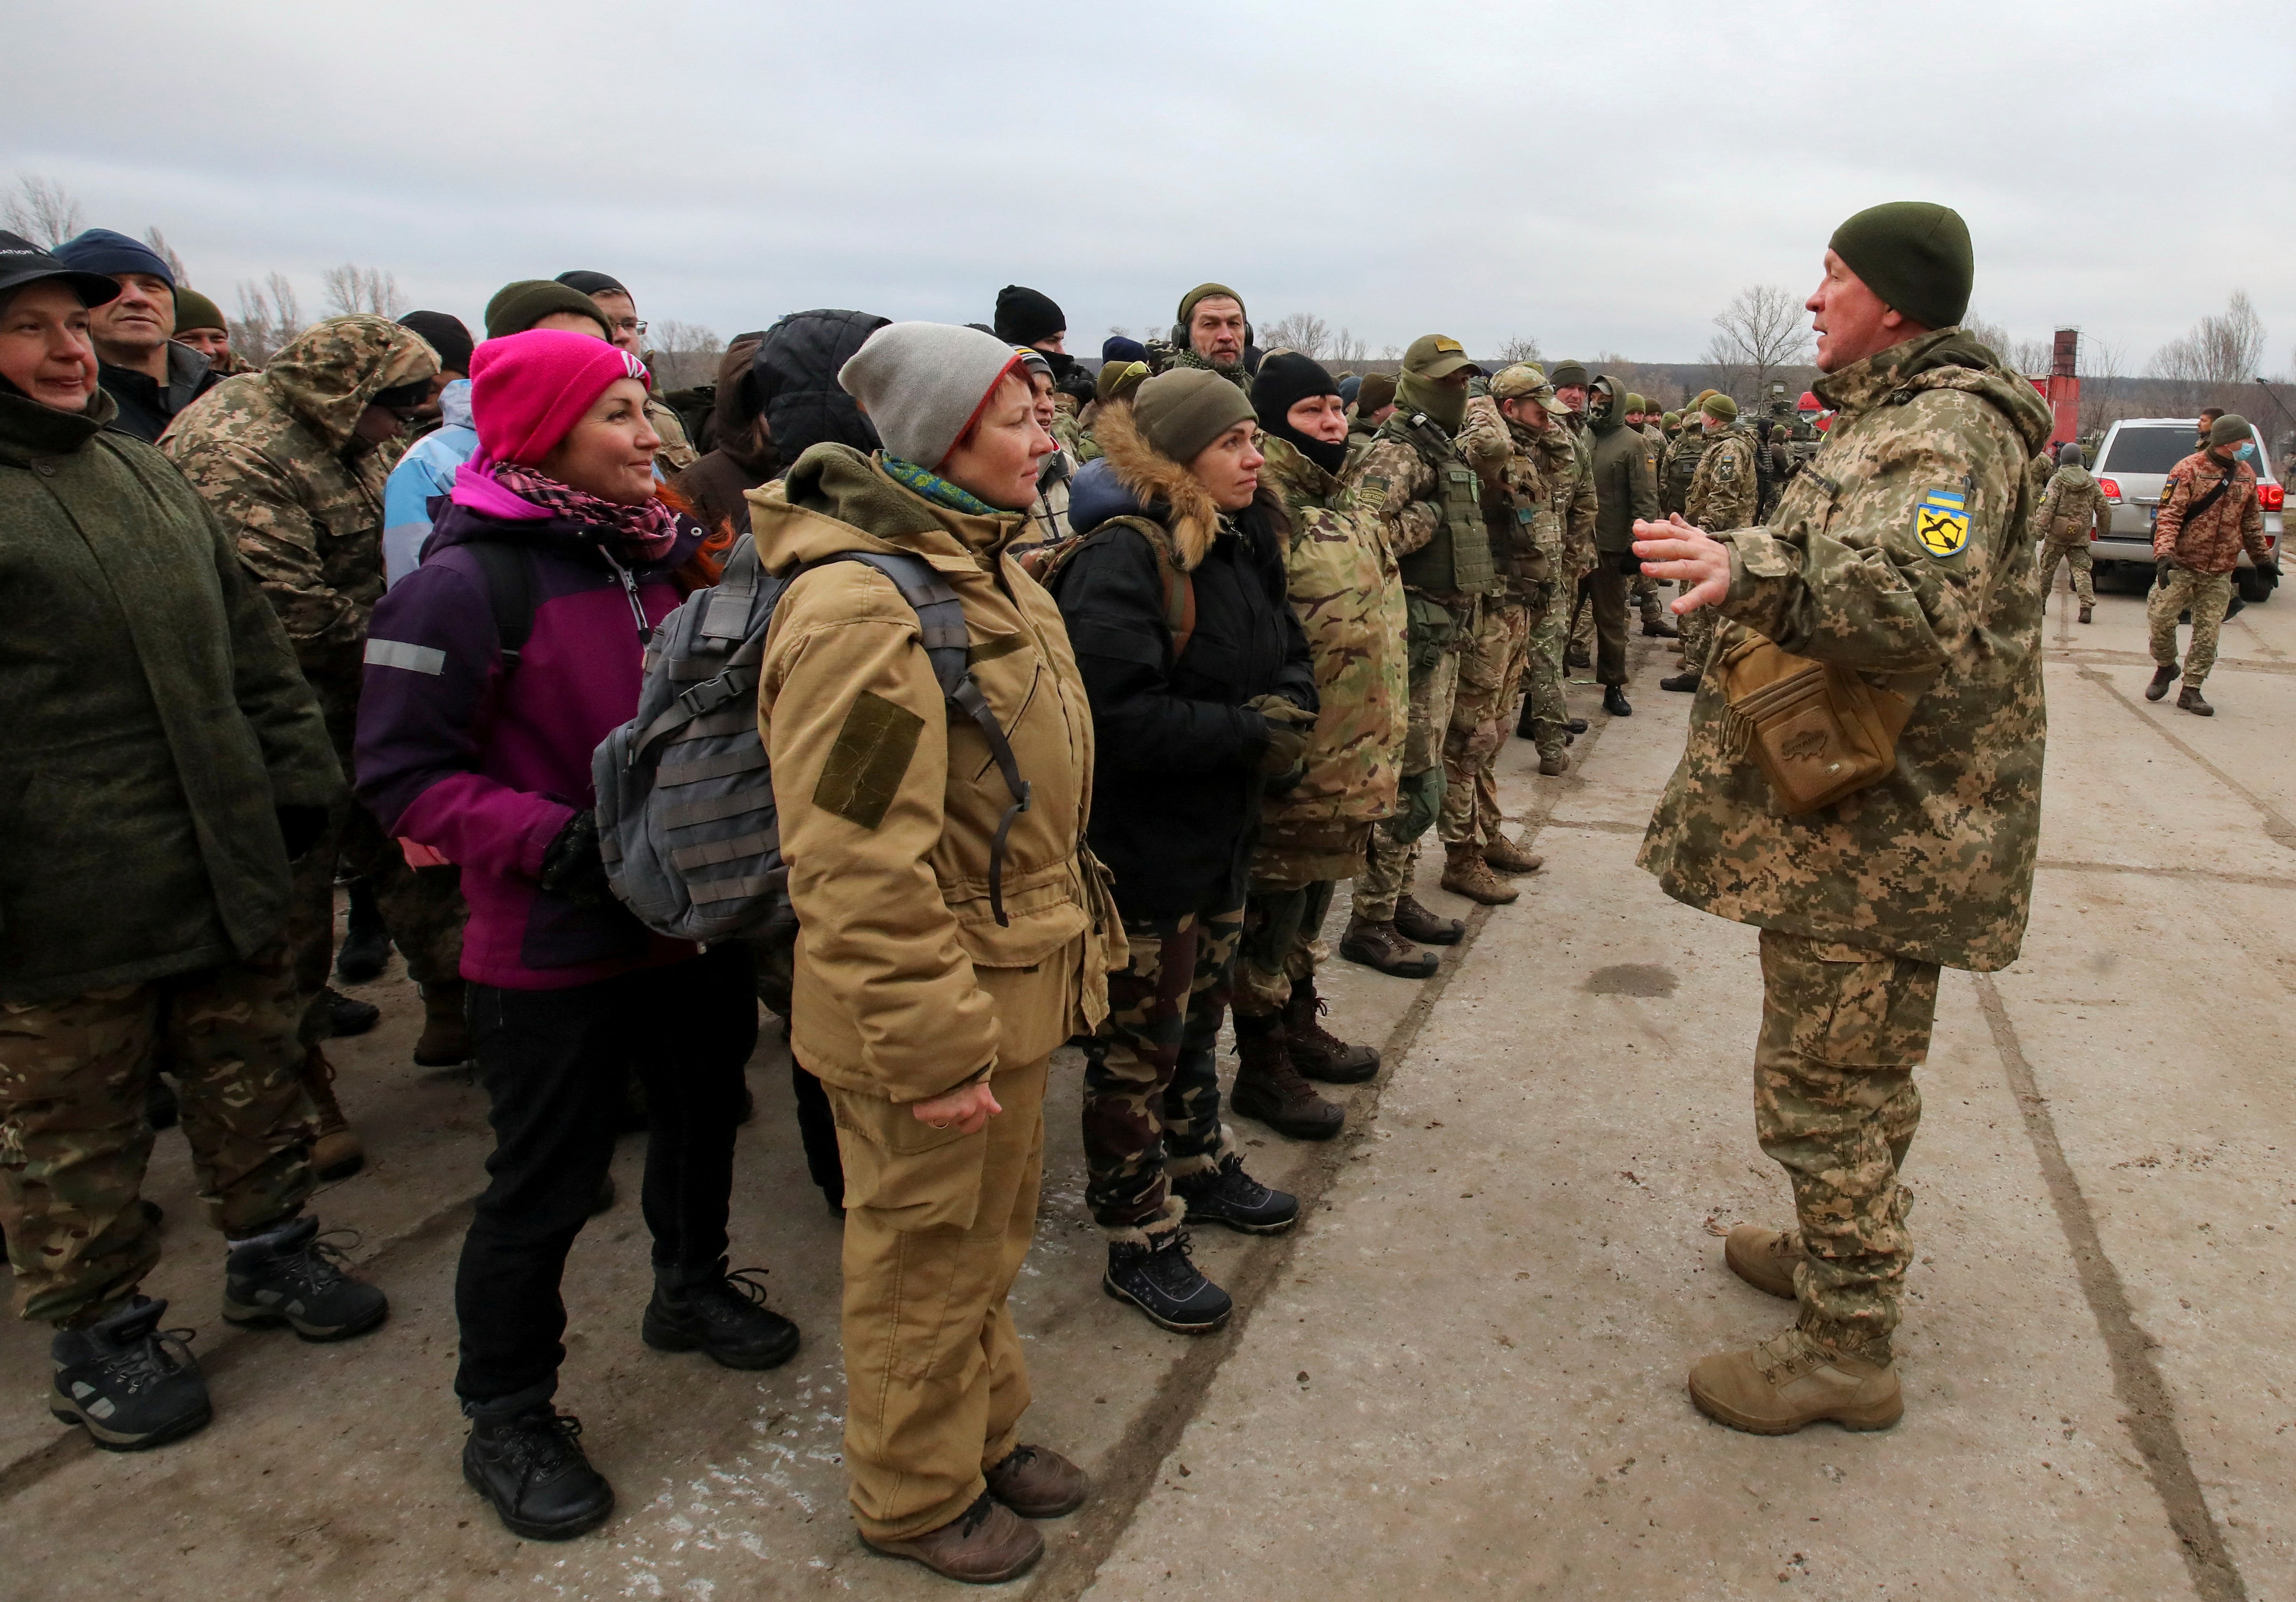 Reservists of the Ukrainian Territorial Defence Forces listen to instructions during military exercises at a training ground outside Kharkiv